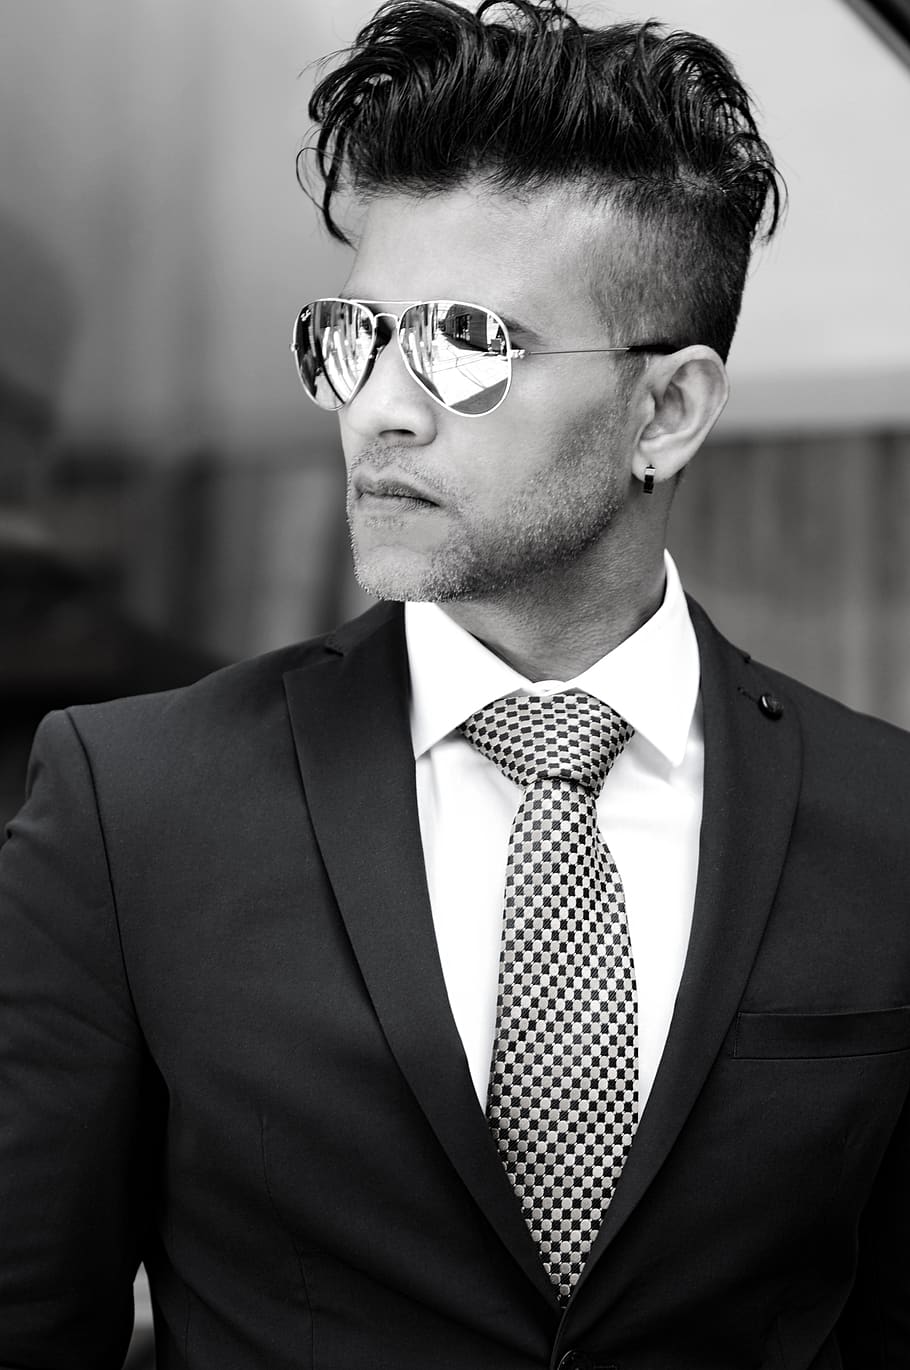 Free Images : work, man, person, suit, male, portrait, office, business,  profession, chef, beard, gentleman, glasses, digital, lead, economy,  development, company, target, businessman, success, career, finance,  manager, tie holder, facial hair, vision